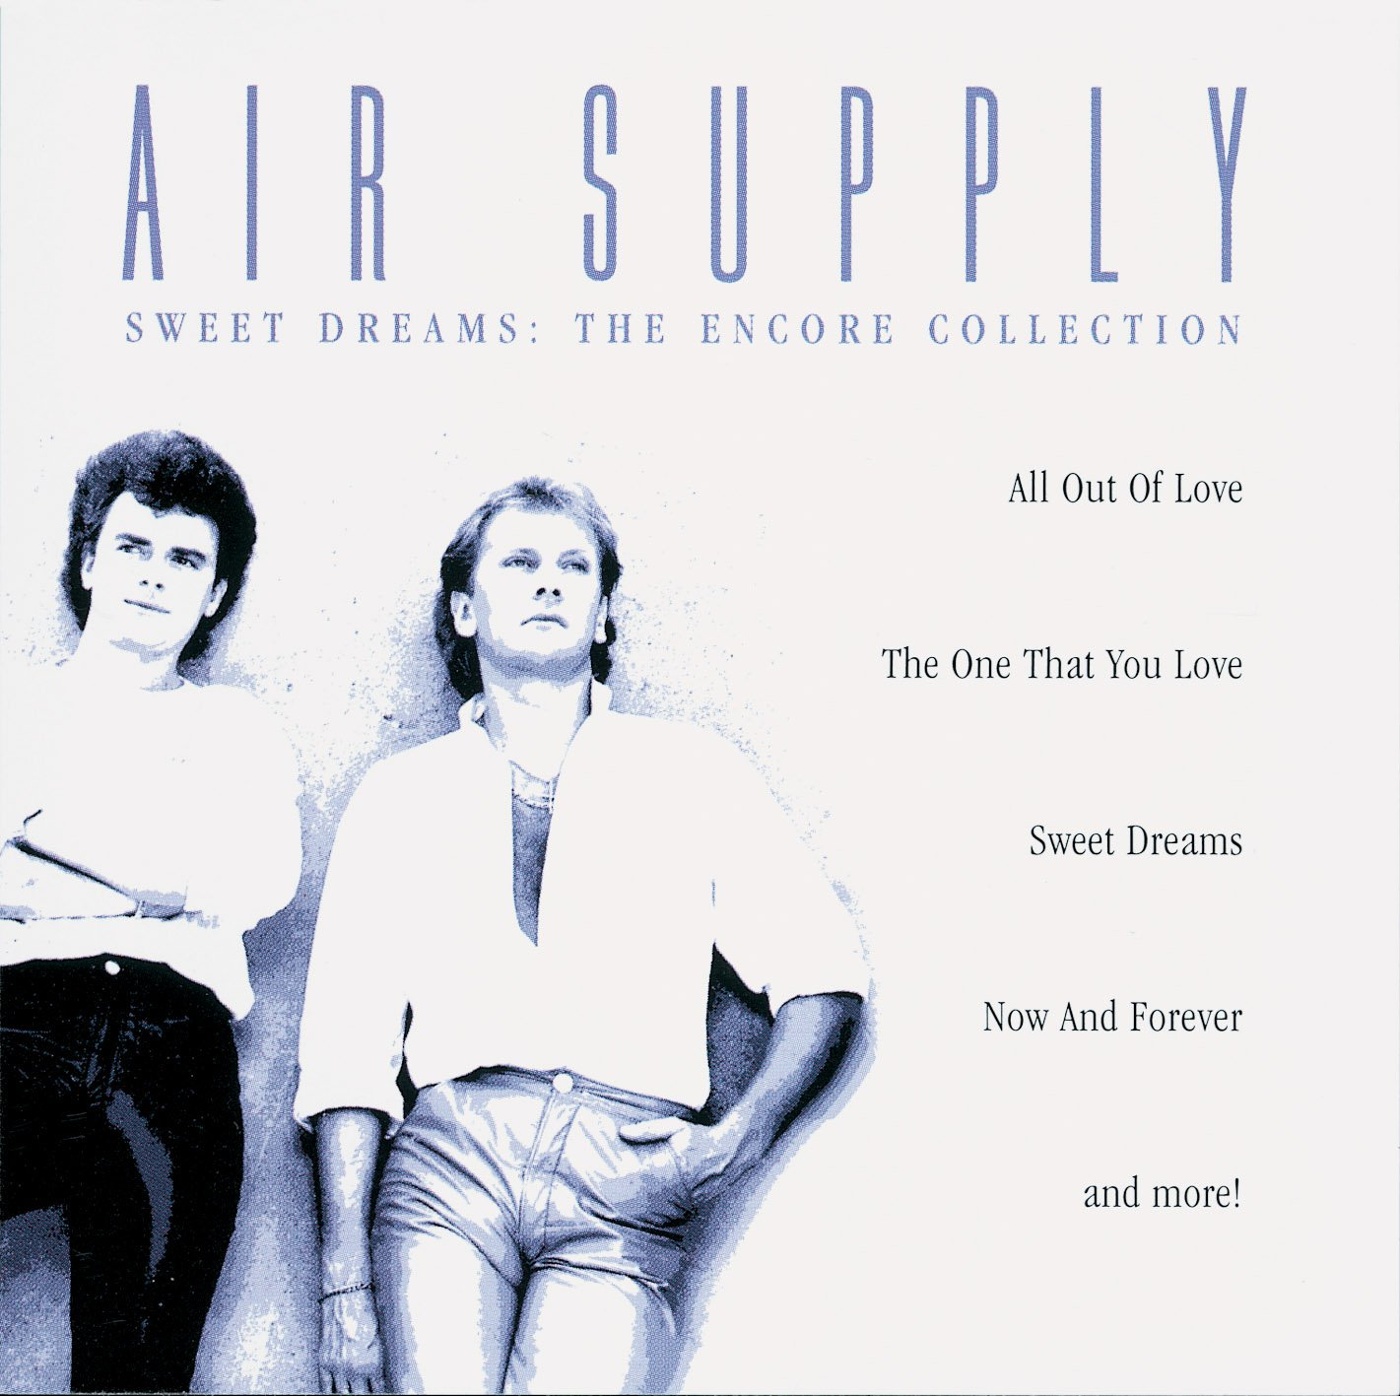 Слушать песни sweet. Air Supply. Air Supply альбом. Sweet Dreams альбом. Air Supply - the Ultimate collection.